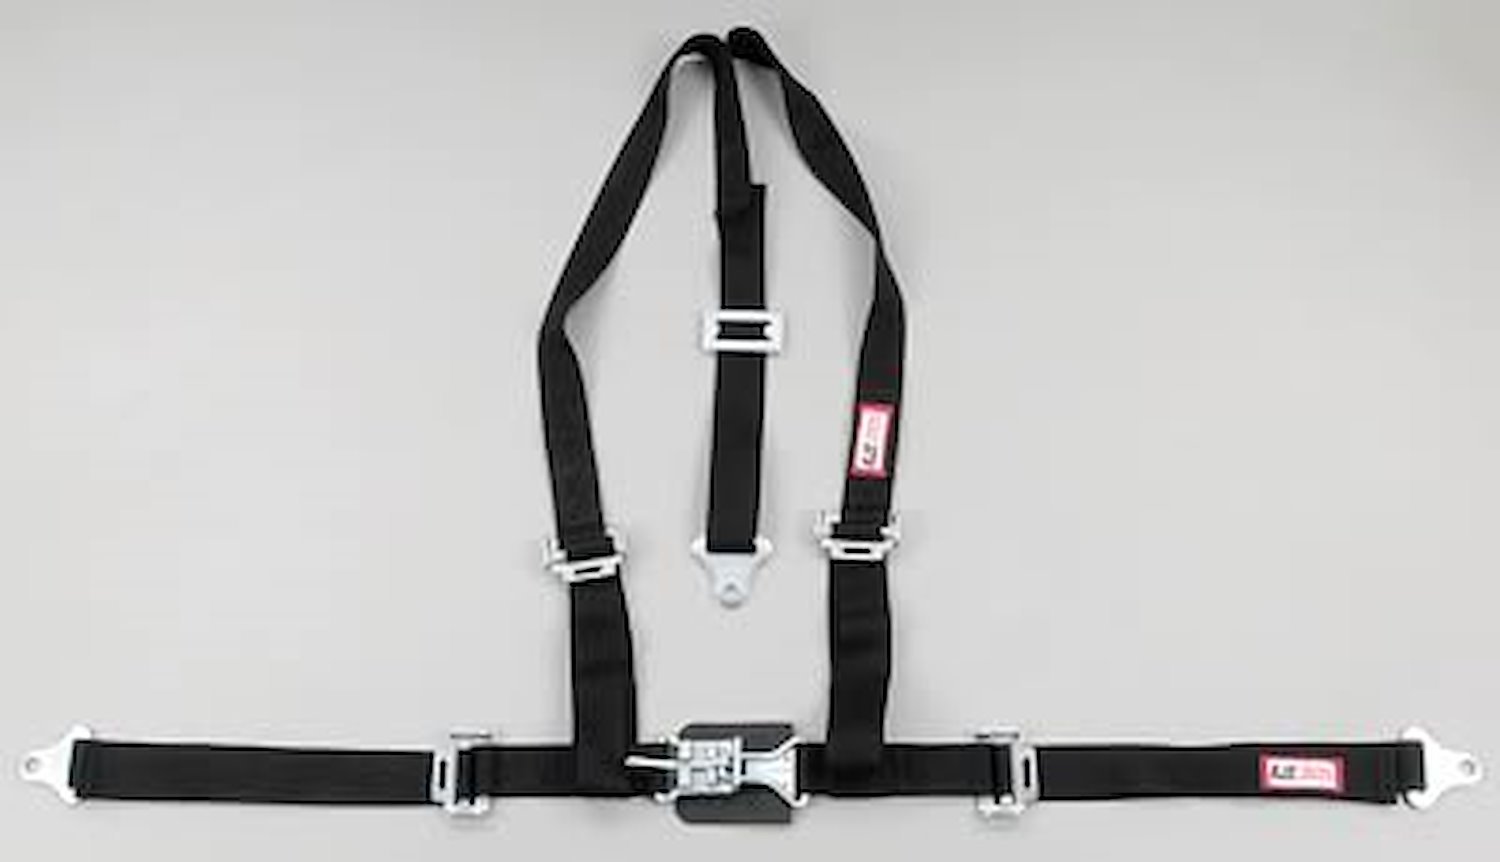 NON-SFI L&L HARNESS 2 PULL UP Lap Belt SNAP SEWN IN 2 S.H. Y FLOOR Mount WRAP/SNAP RED